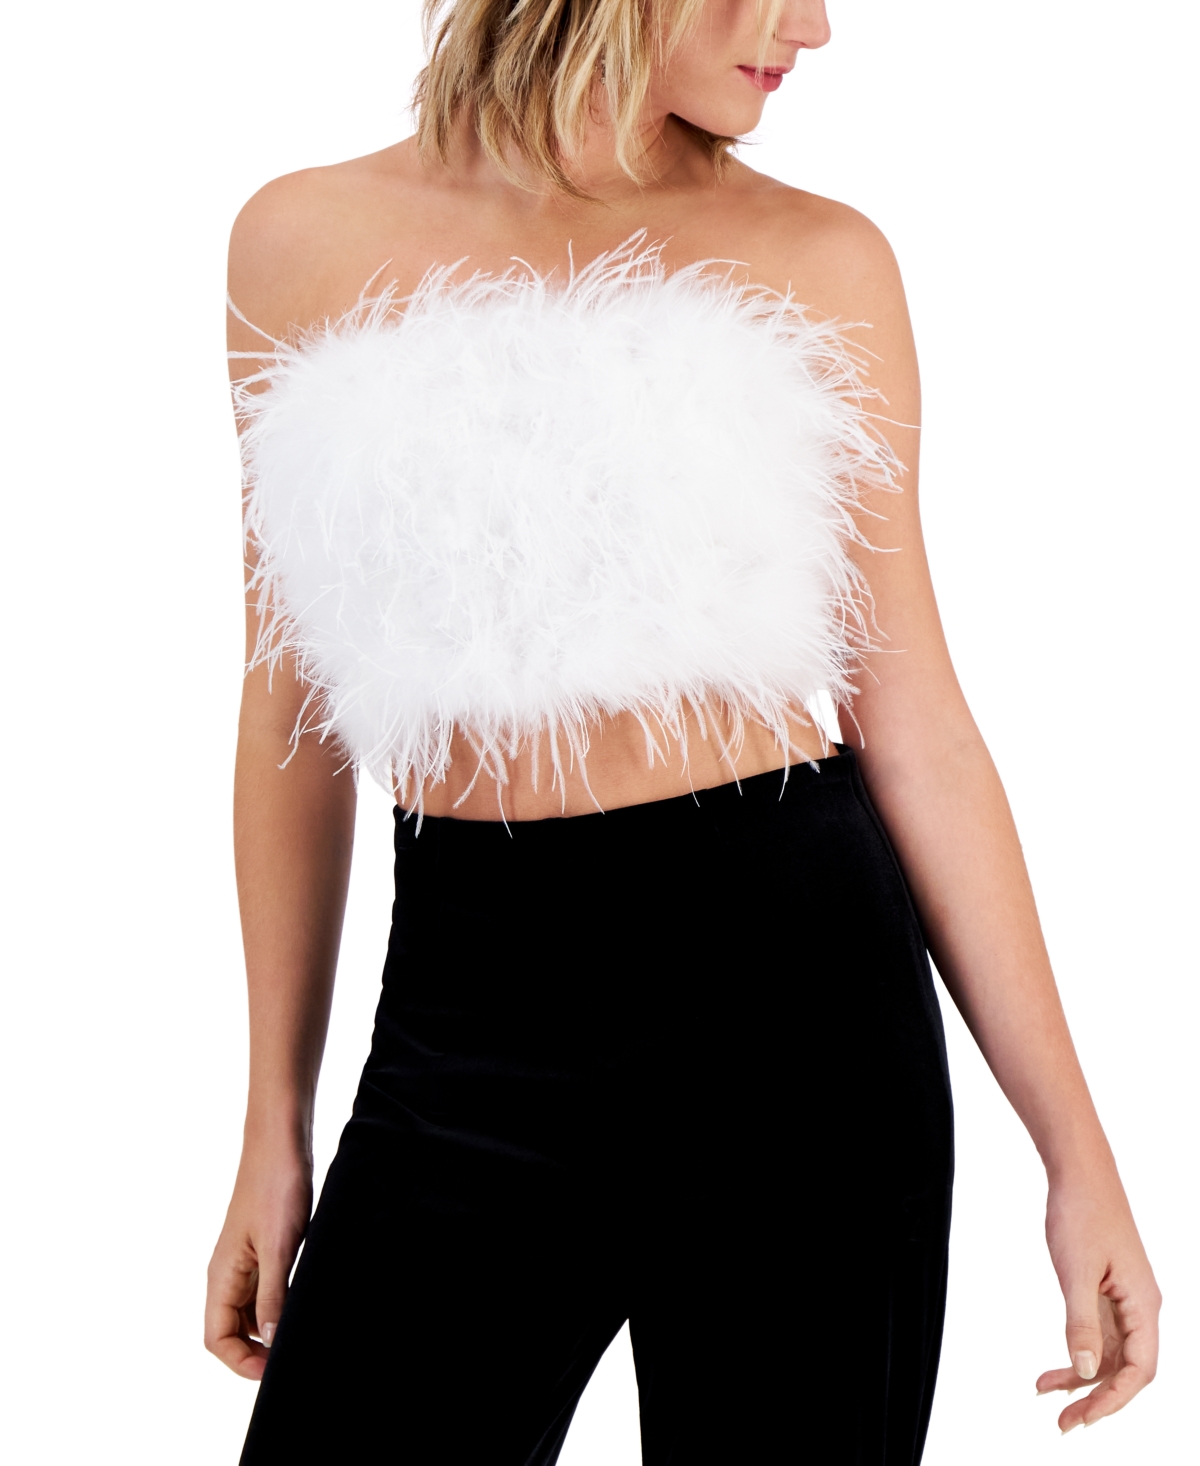 Alex & Sophia Juniors' Strapless Zip-back Feather-front Top In Offwhite,offwhite